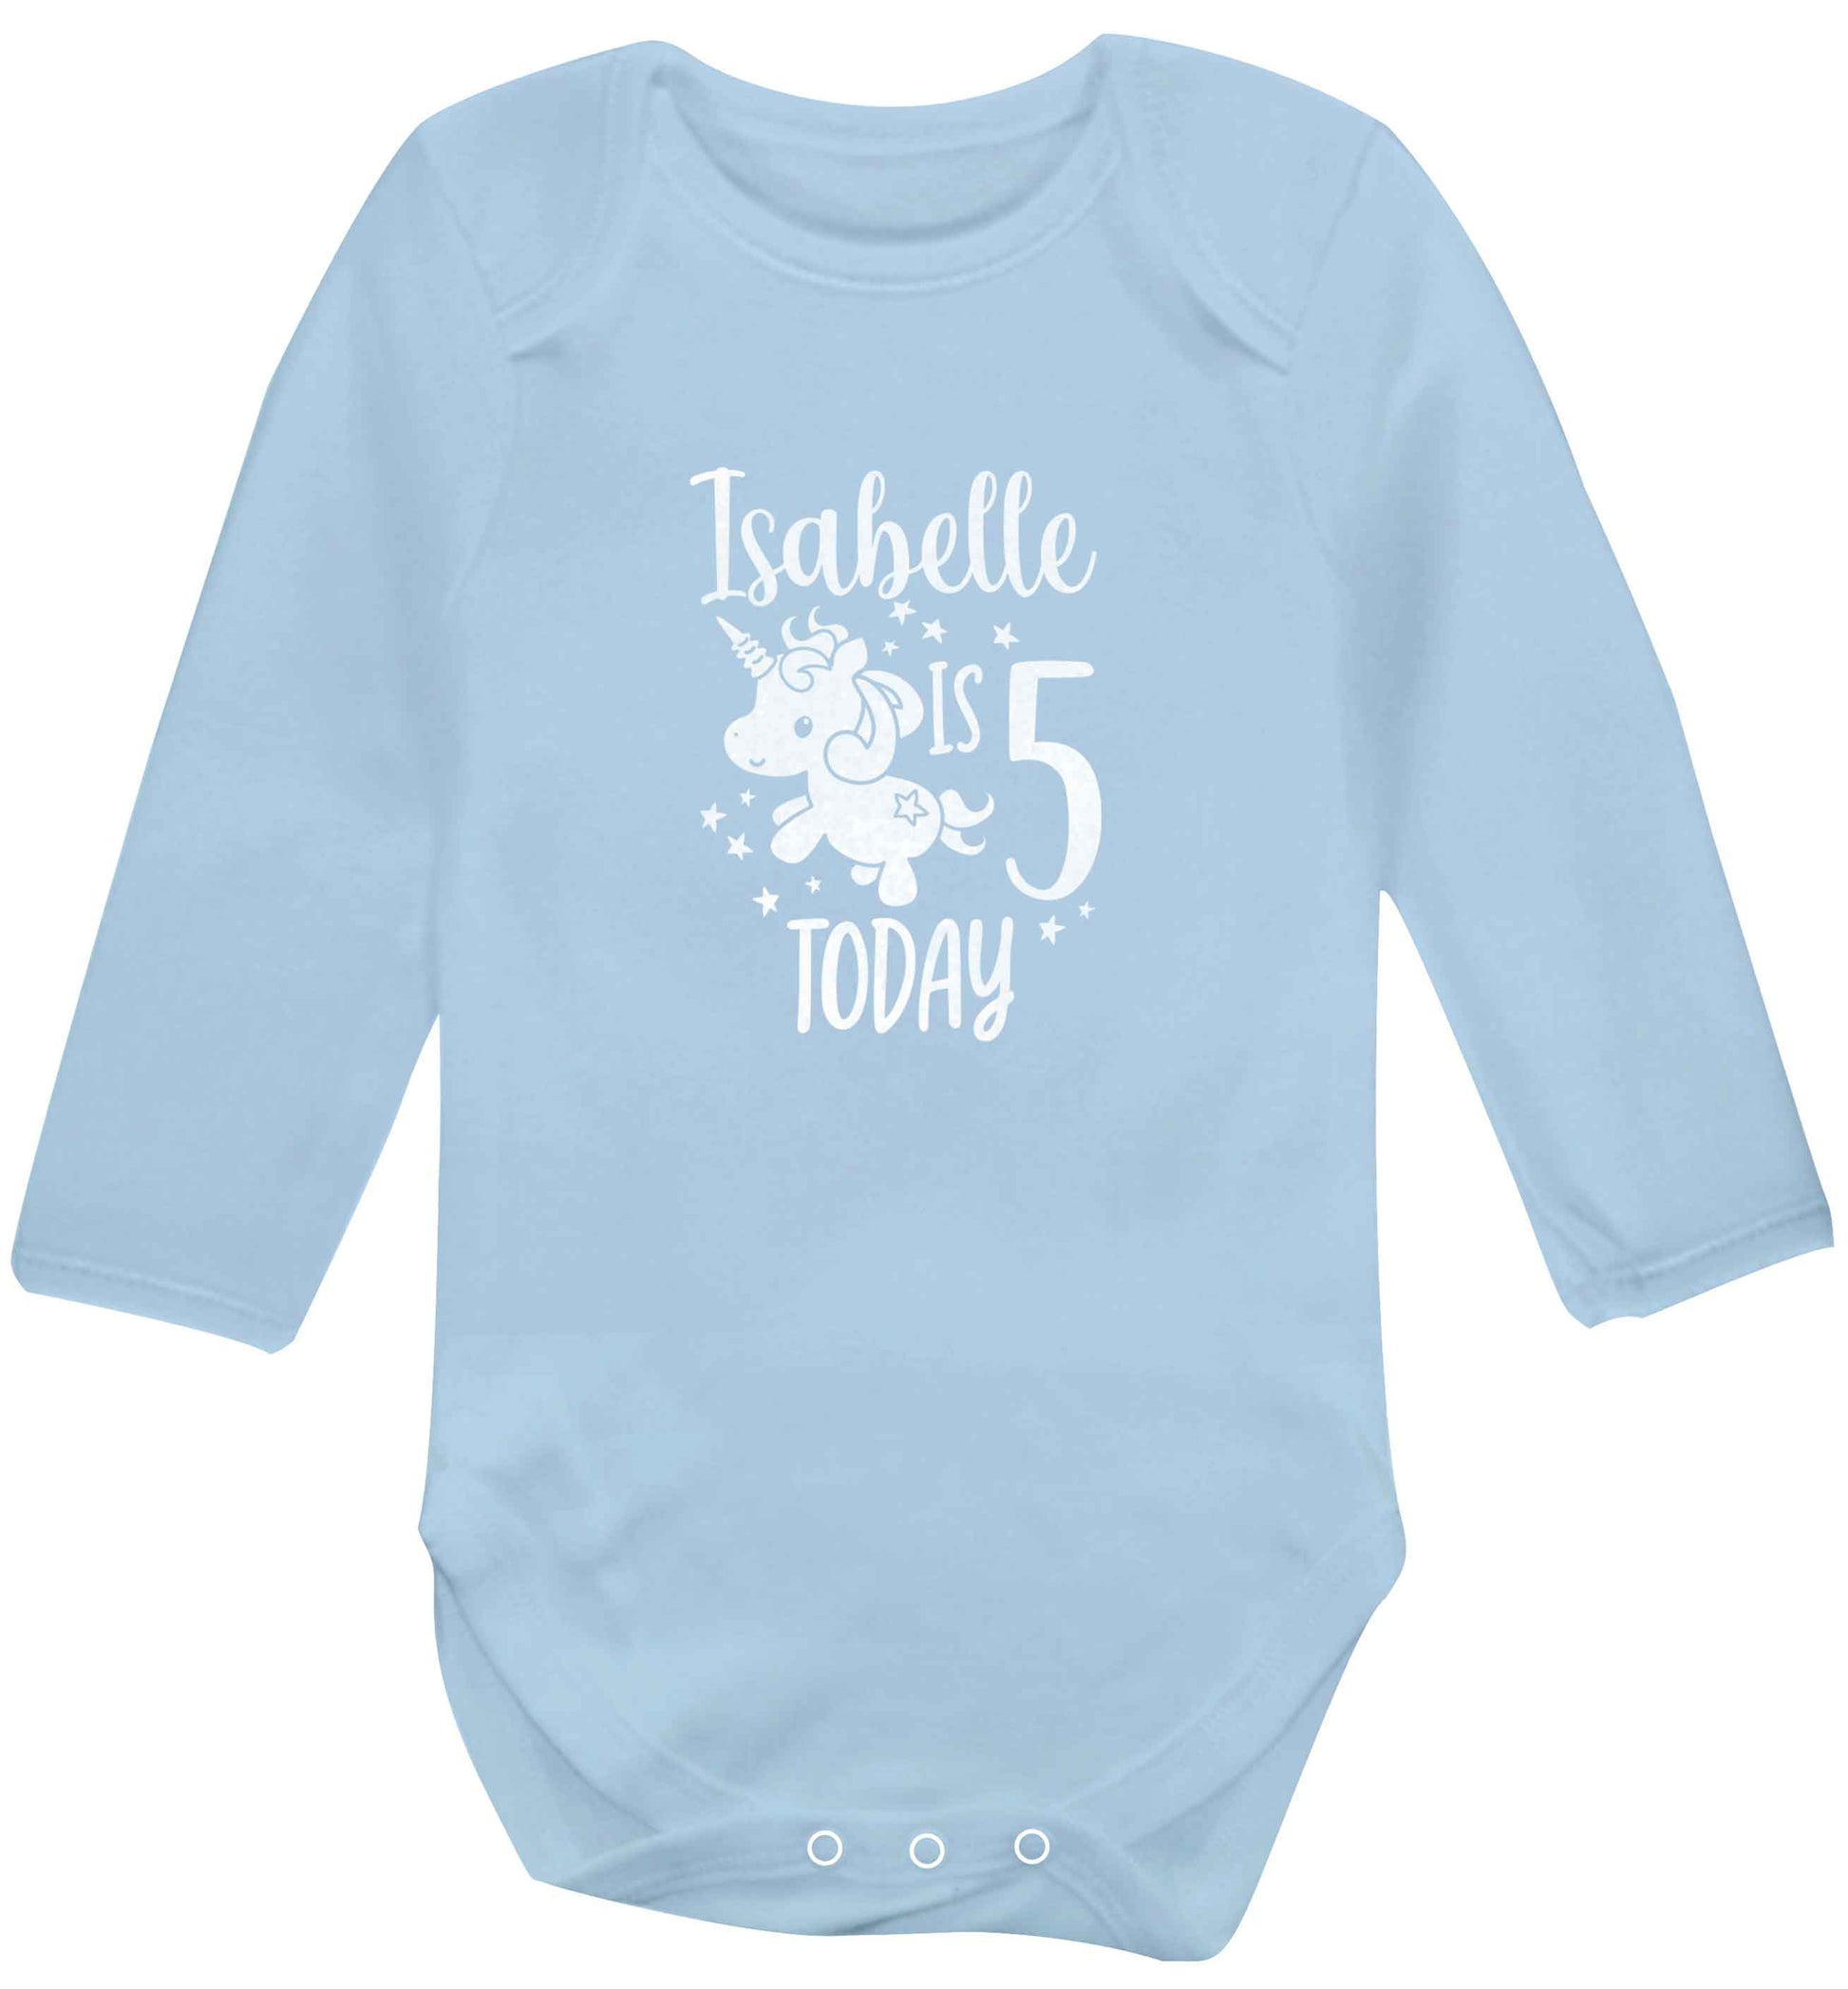 Today I am - Personalise with any name or age! Birthday unicorn baby vest long sleeved pale blue 6-12 months